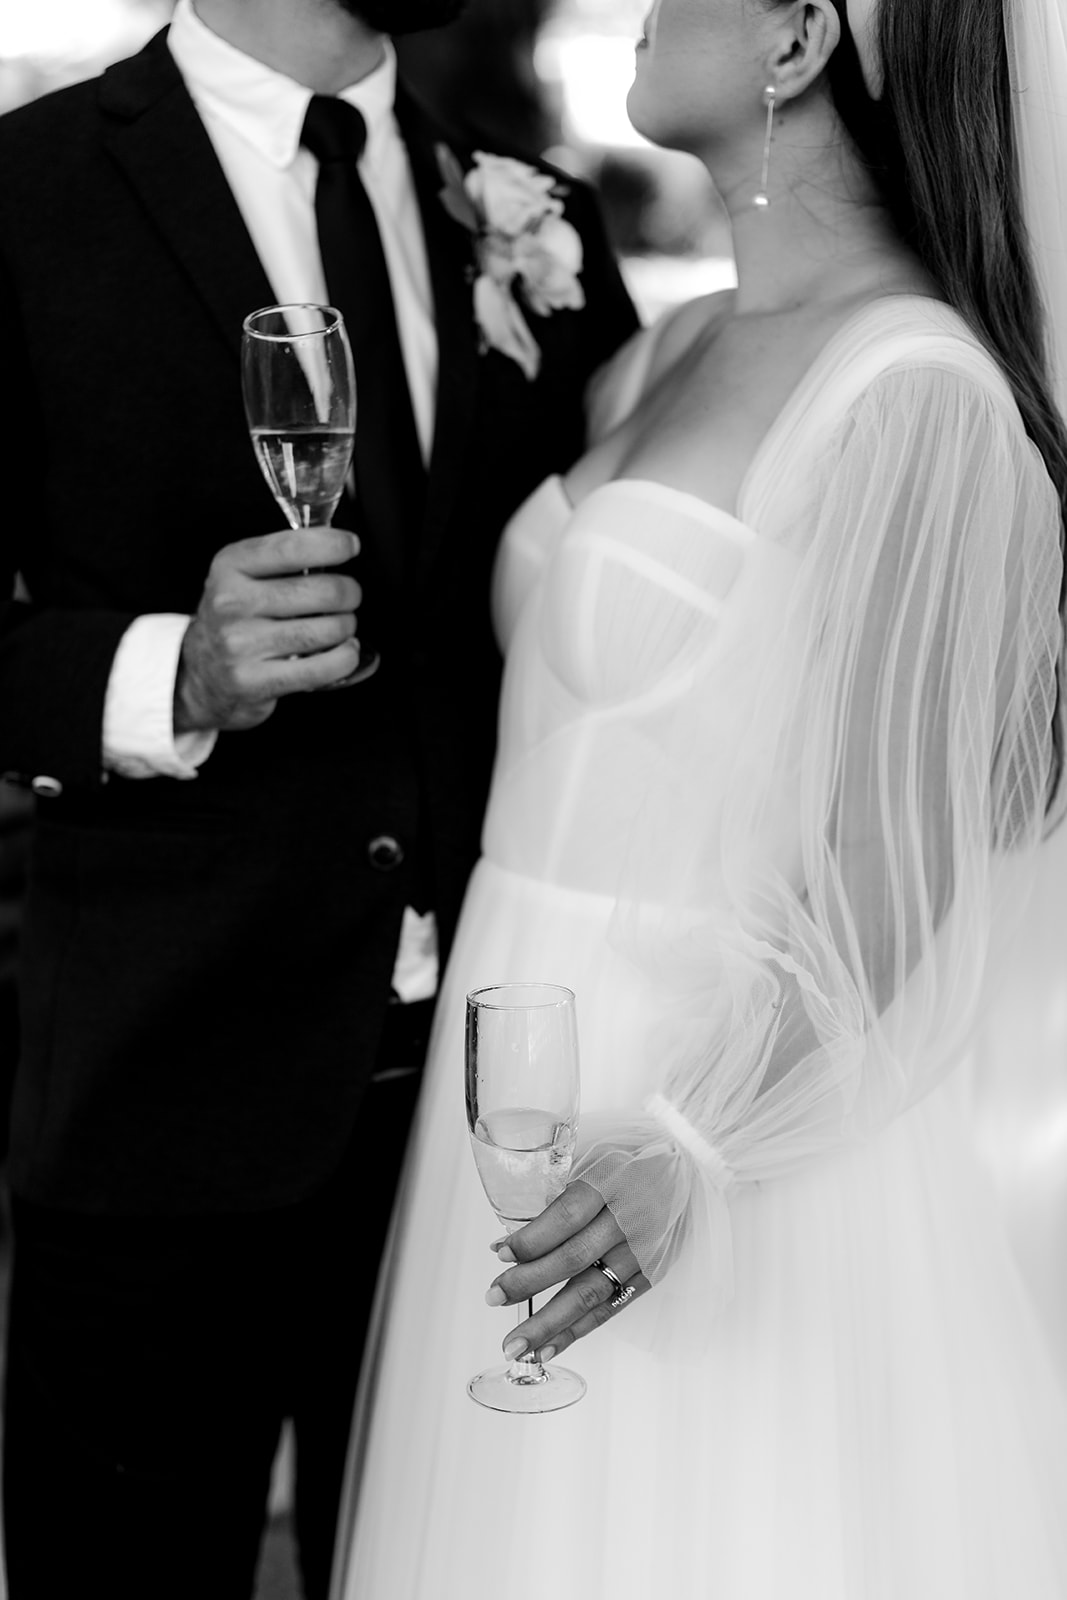 Close-up of bride & groom enjoying some champagne at their elegant country wedding.